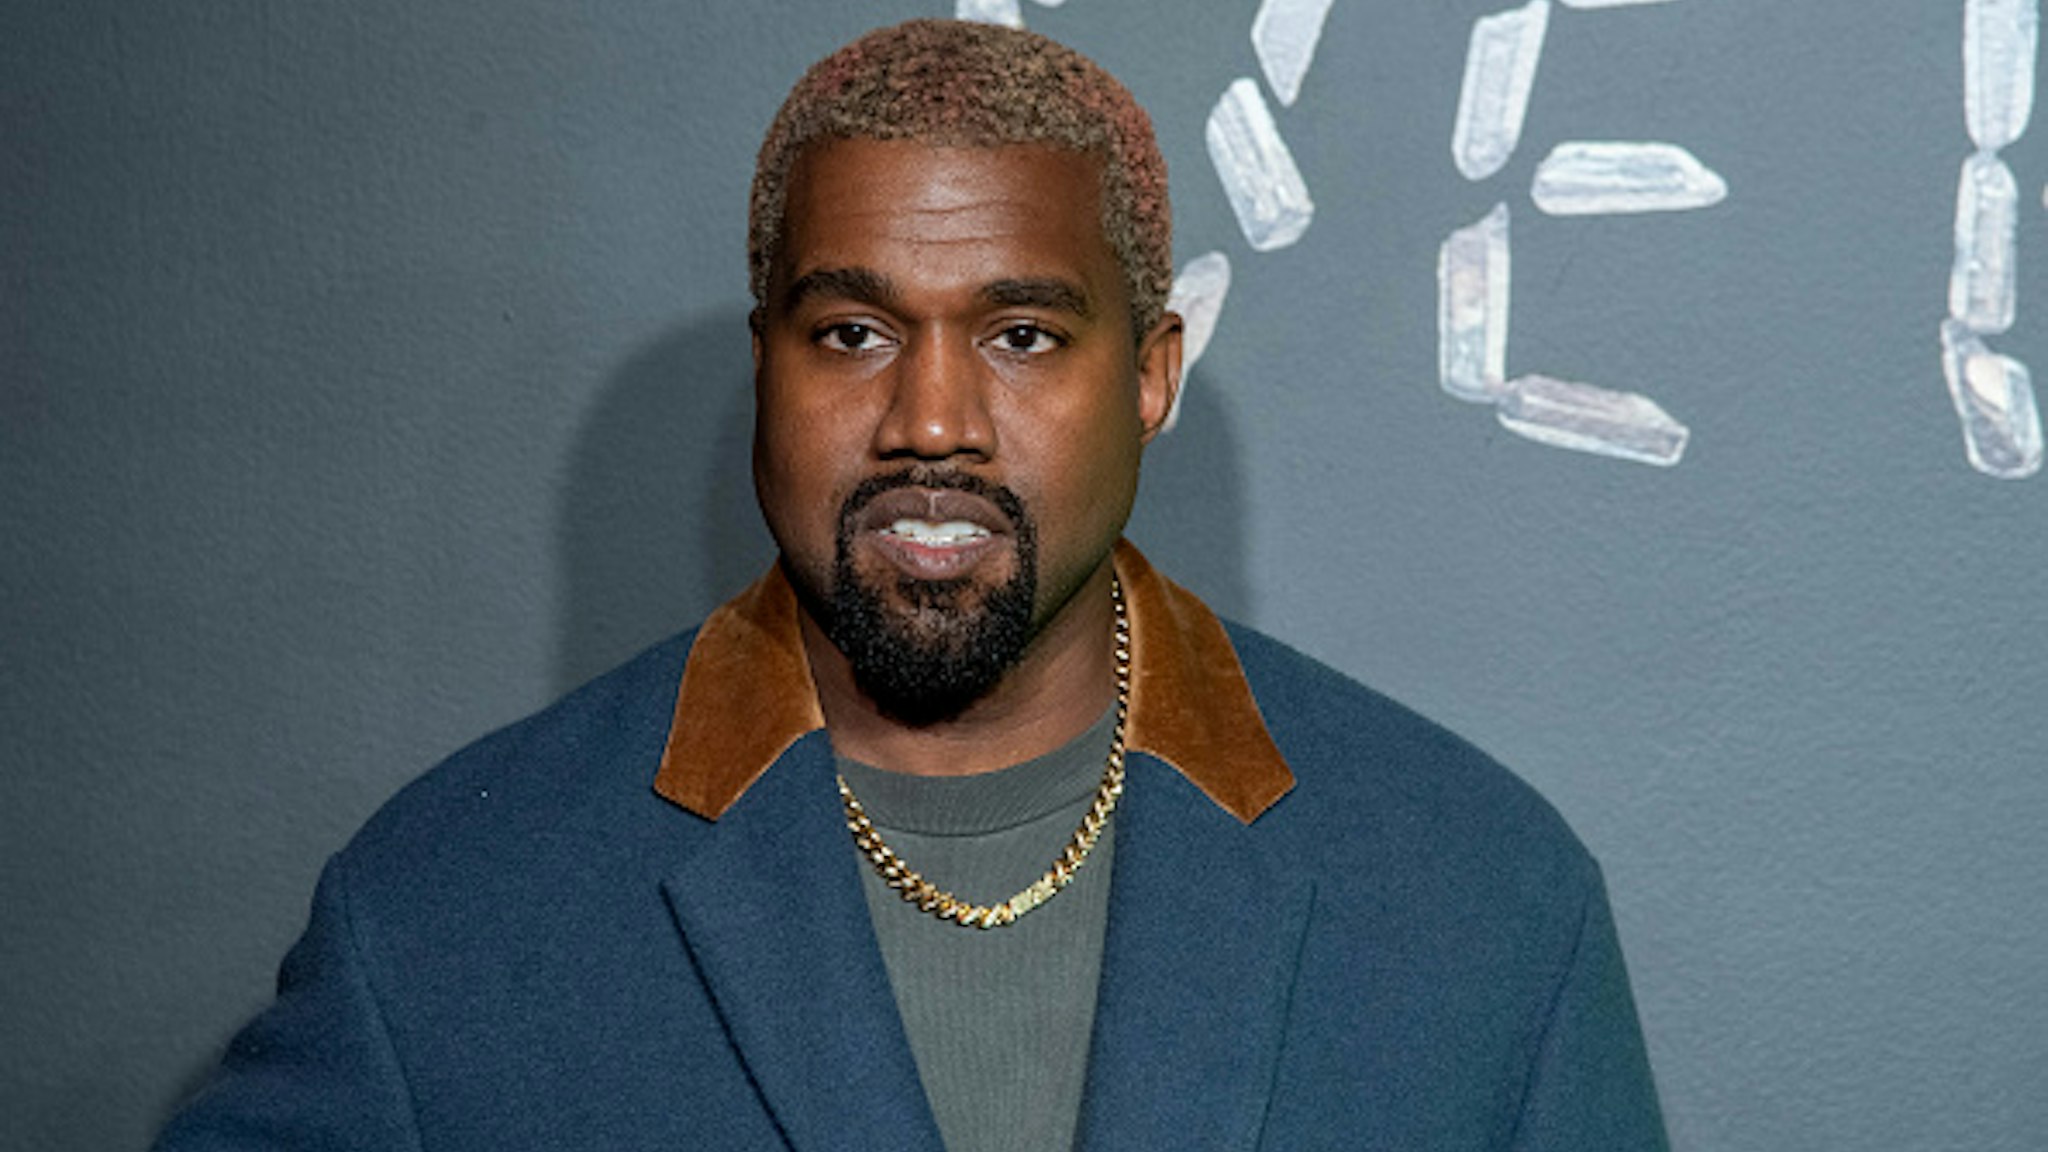 NEW YORK, NEW YORK - DECEMBER 02: Kanye West attends the the Versace fall 2019 fashion show at the American Stock Exchange Building in lower Manhattan on December 02, 2018 in New York City.